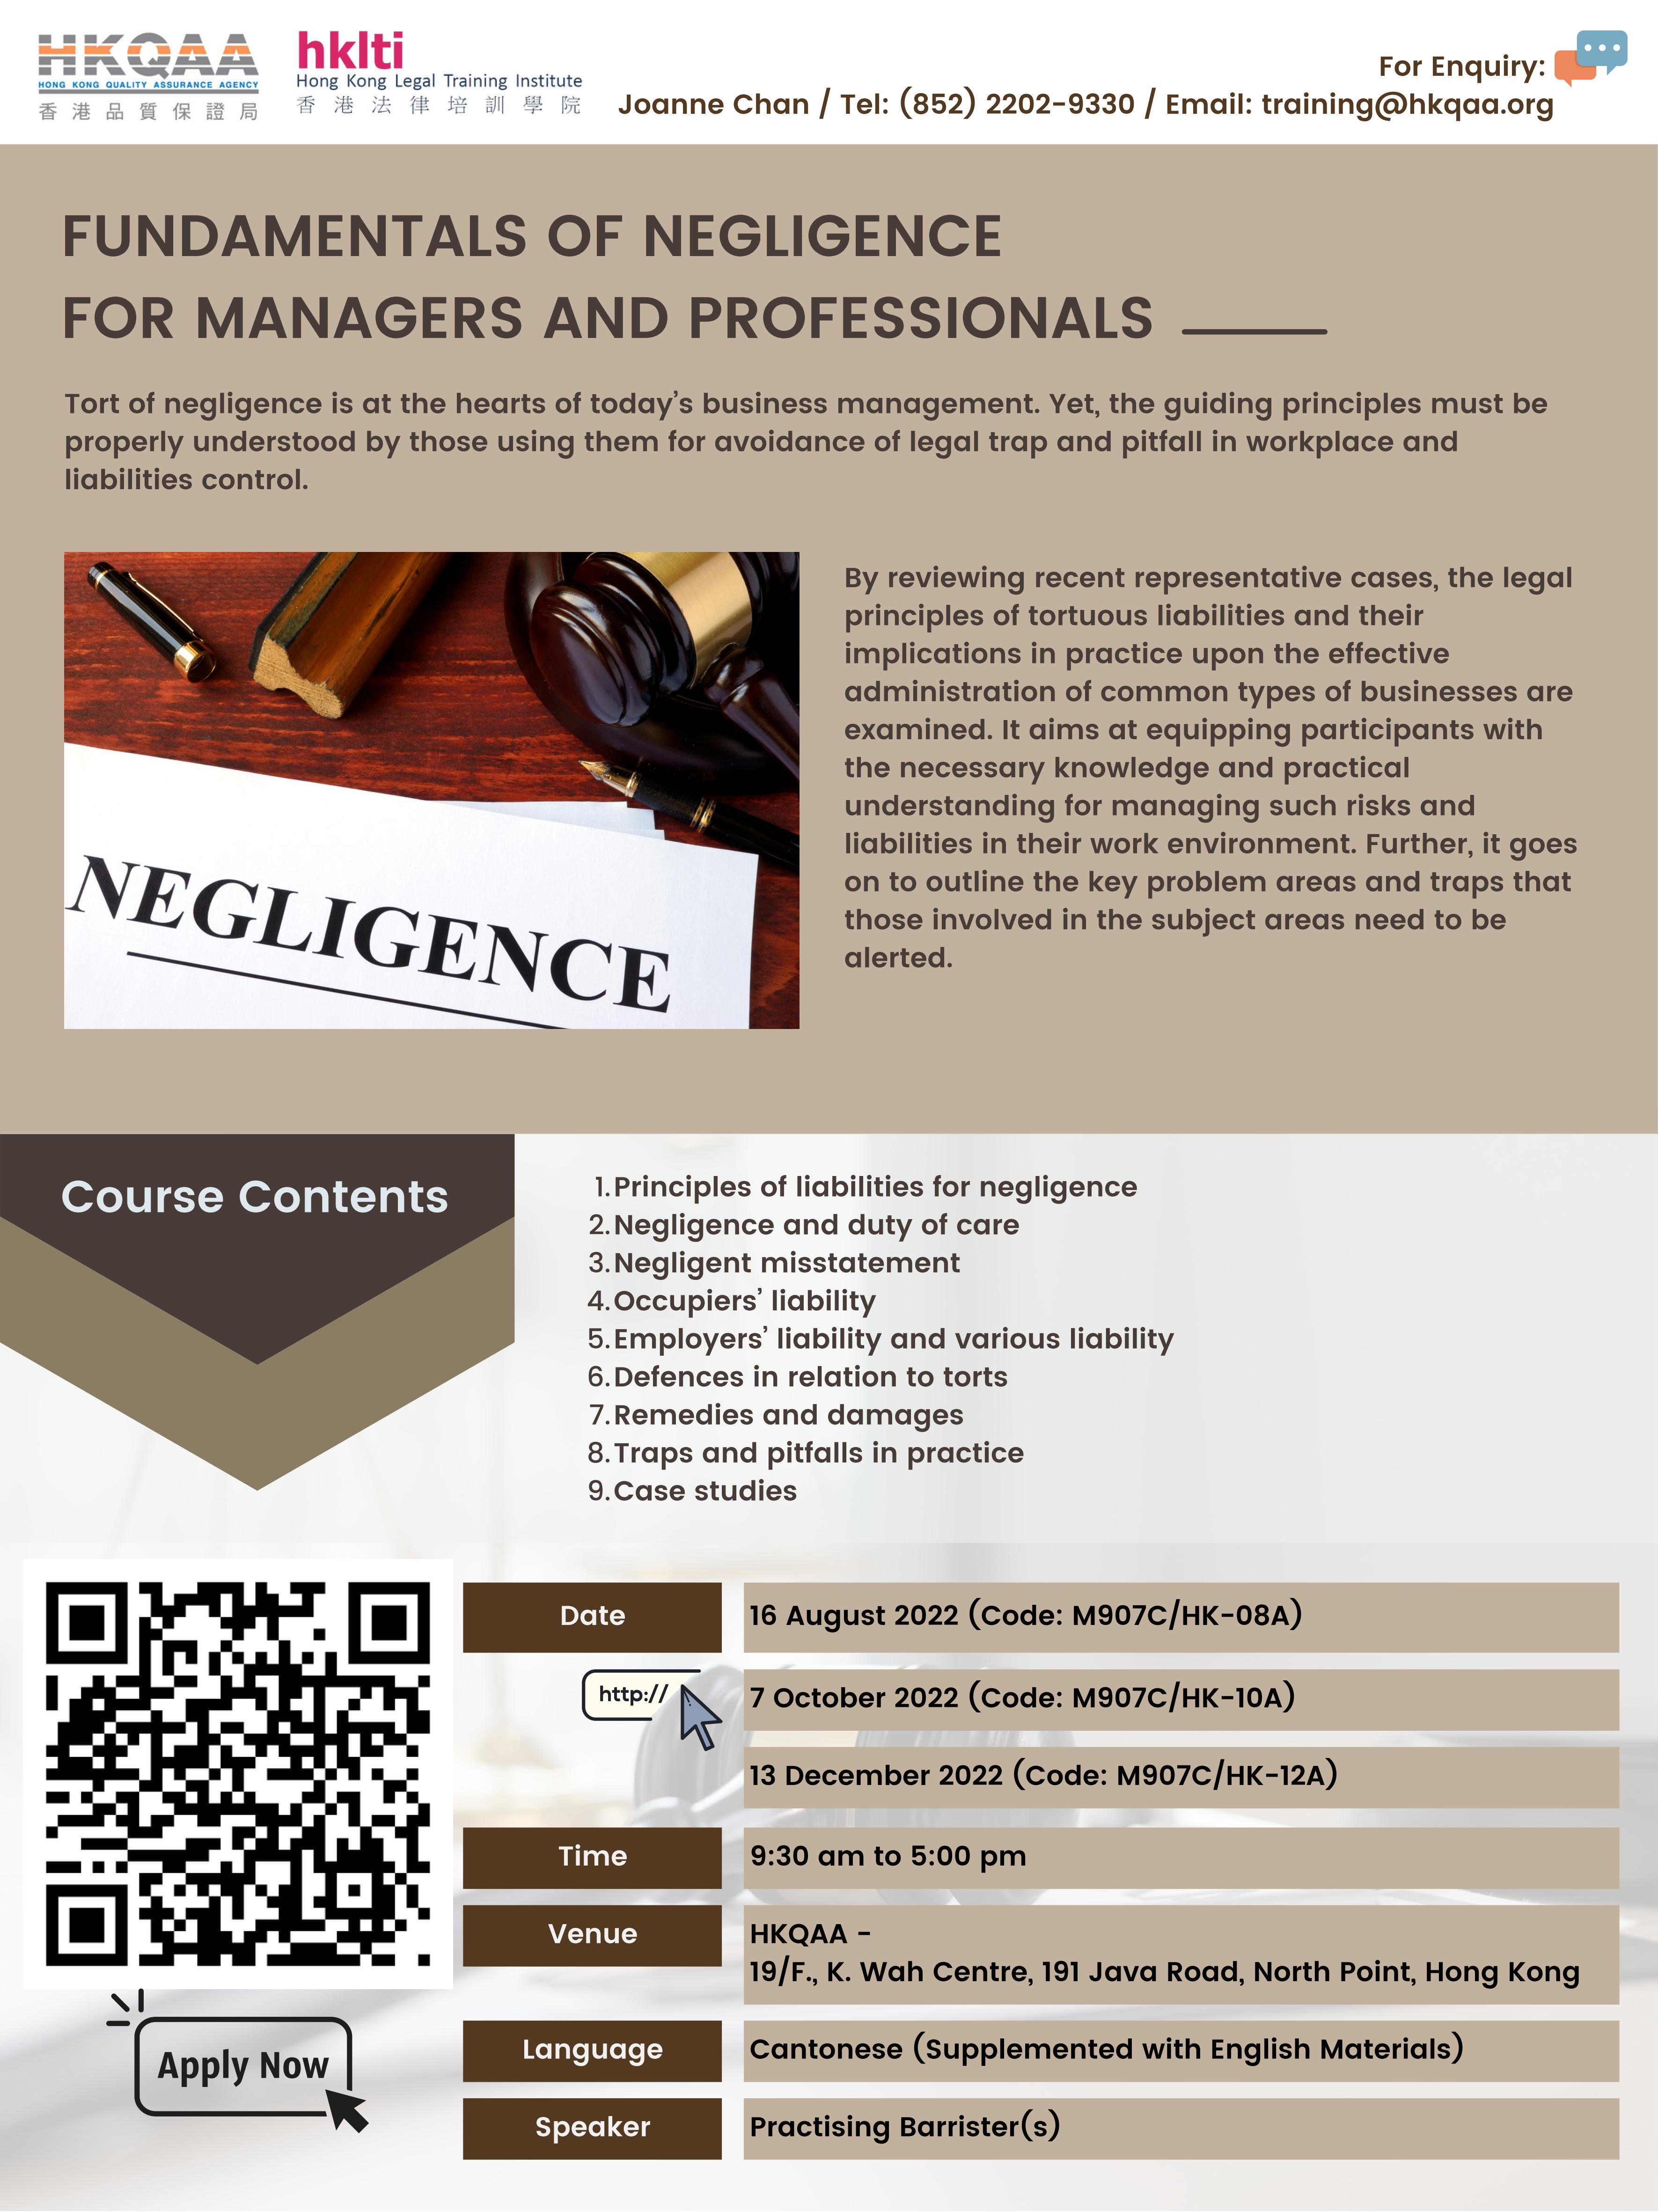 Fundamentals of Negligence for Managers and Professionals